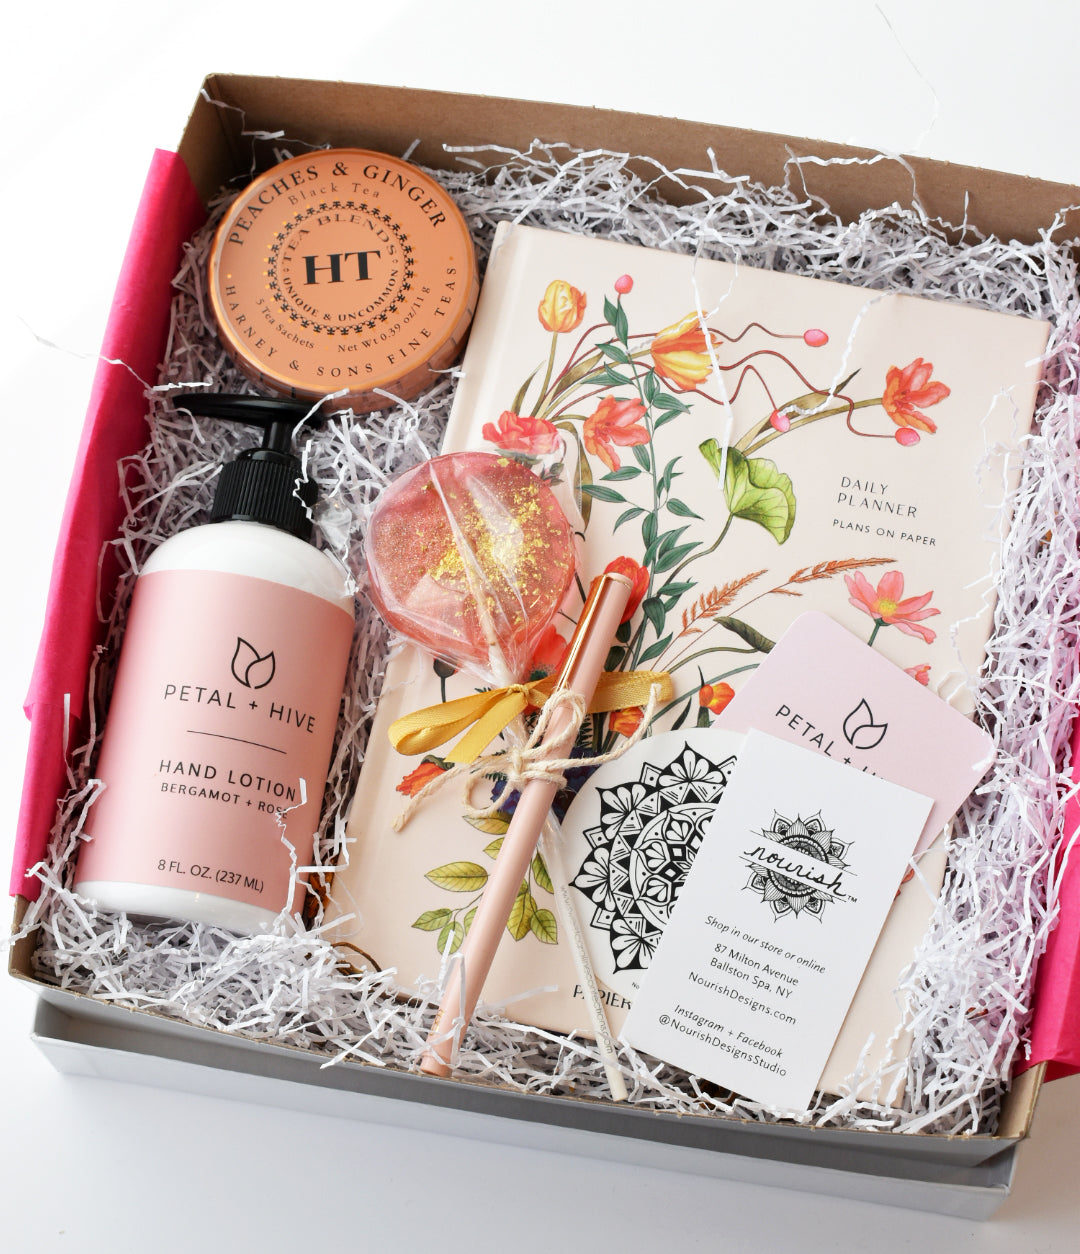 Daily Planner Gift Box - a Petal + Hive / Nourish Designs Collaboration